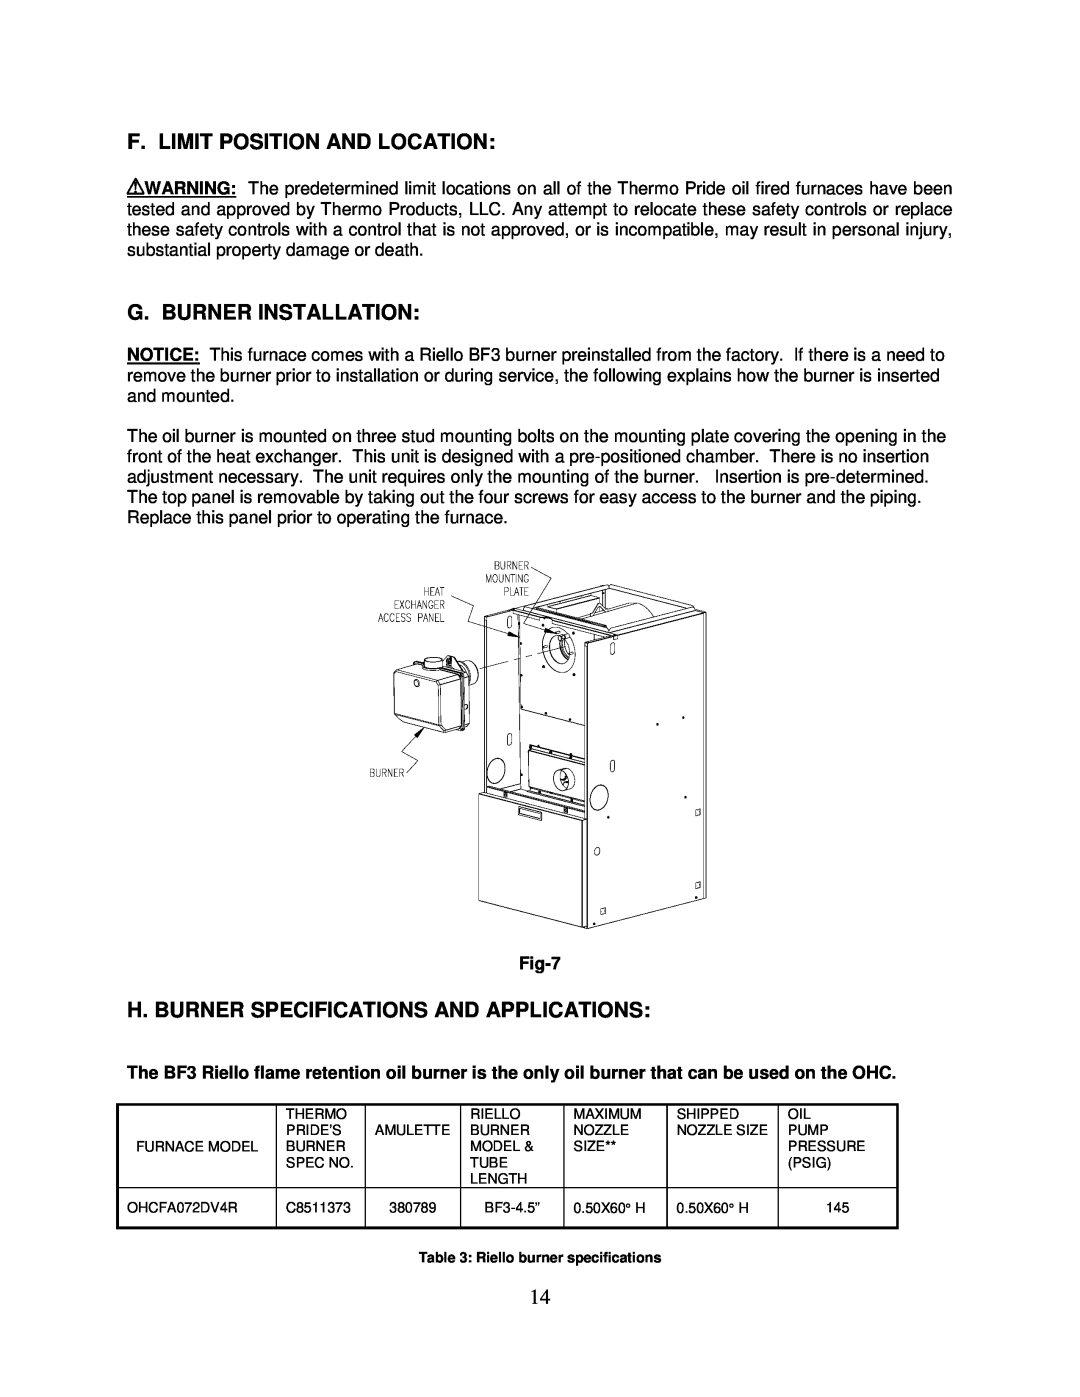 Thermo Products PHCFA072DV4R operation manual F. Limit Position And Location, G. Burner Installation, Fig-7 